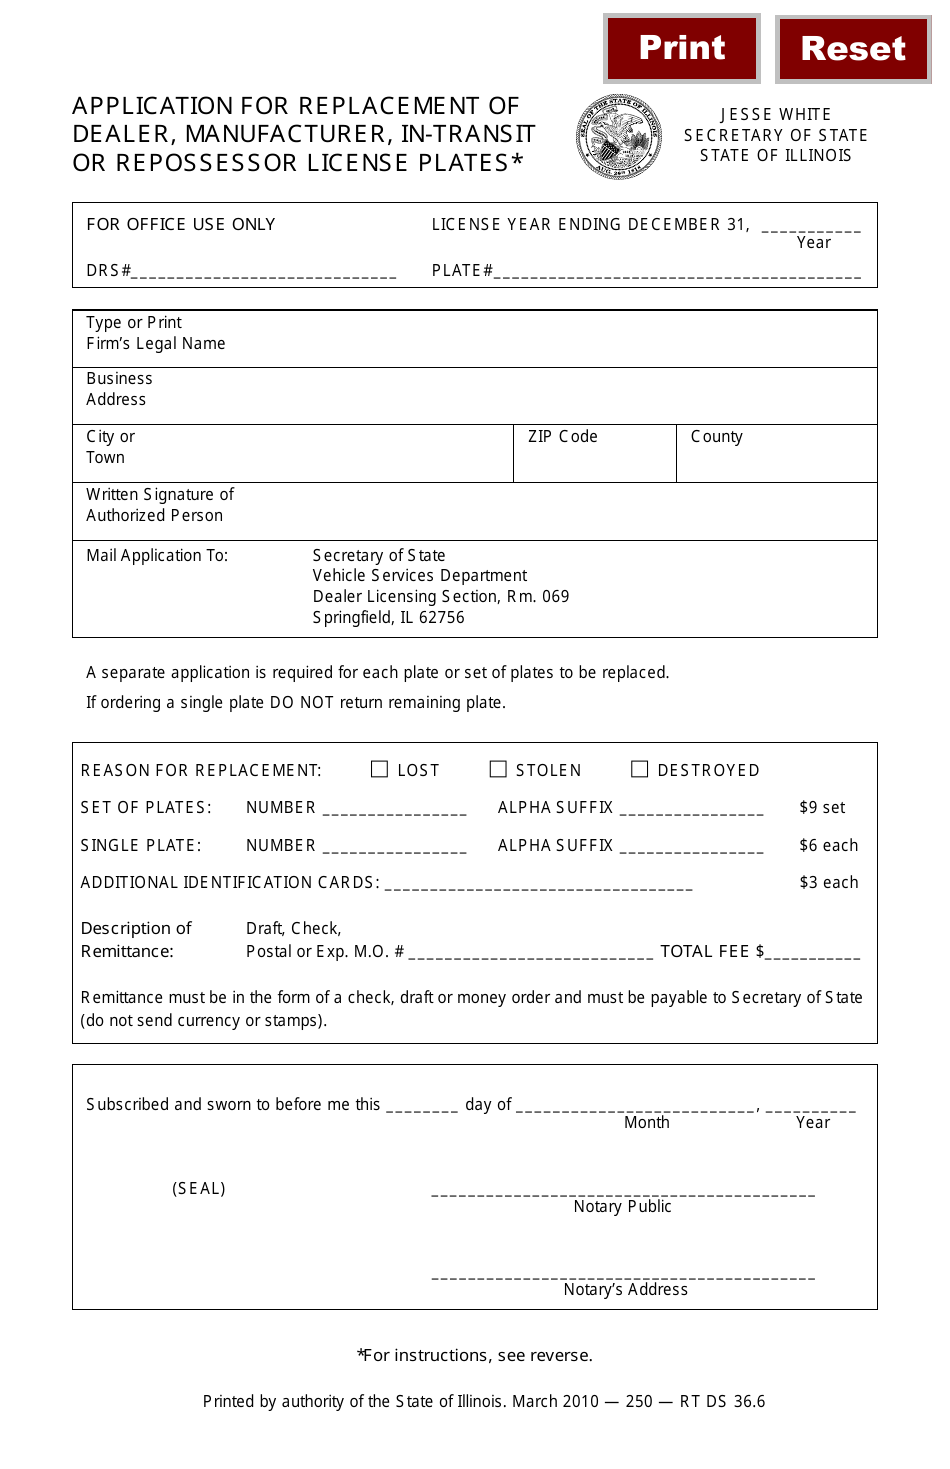 Form RT DS36.6 Application for Replacement of Dealer, Manufacturer, in-Transit or Repossessor License Plates - Illinois, Page 1